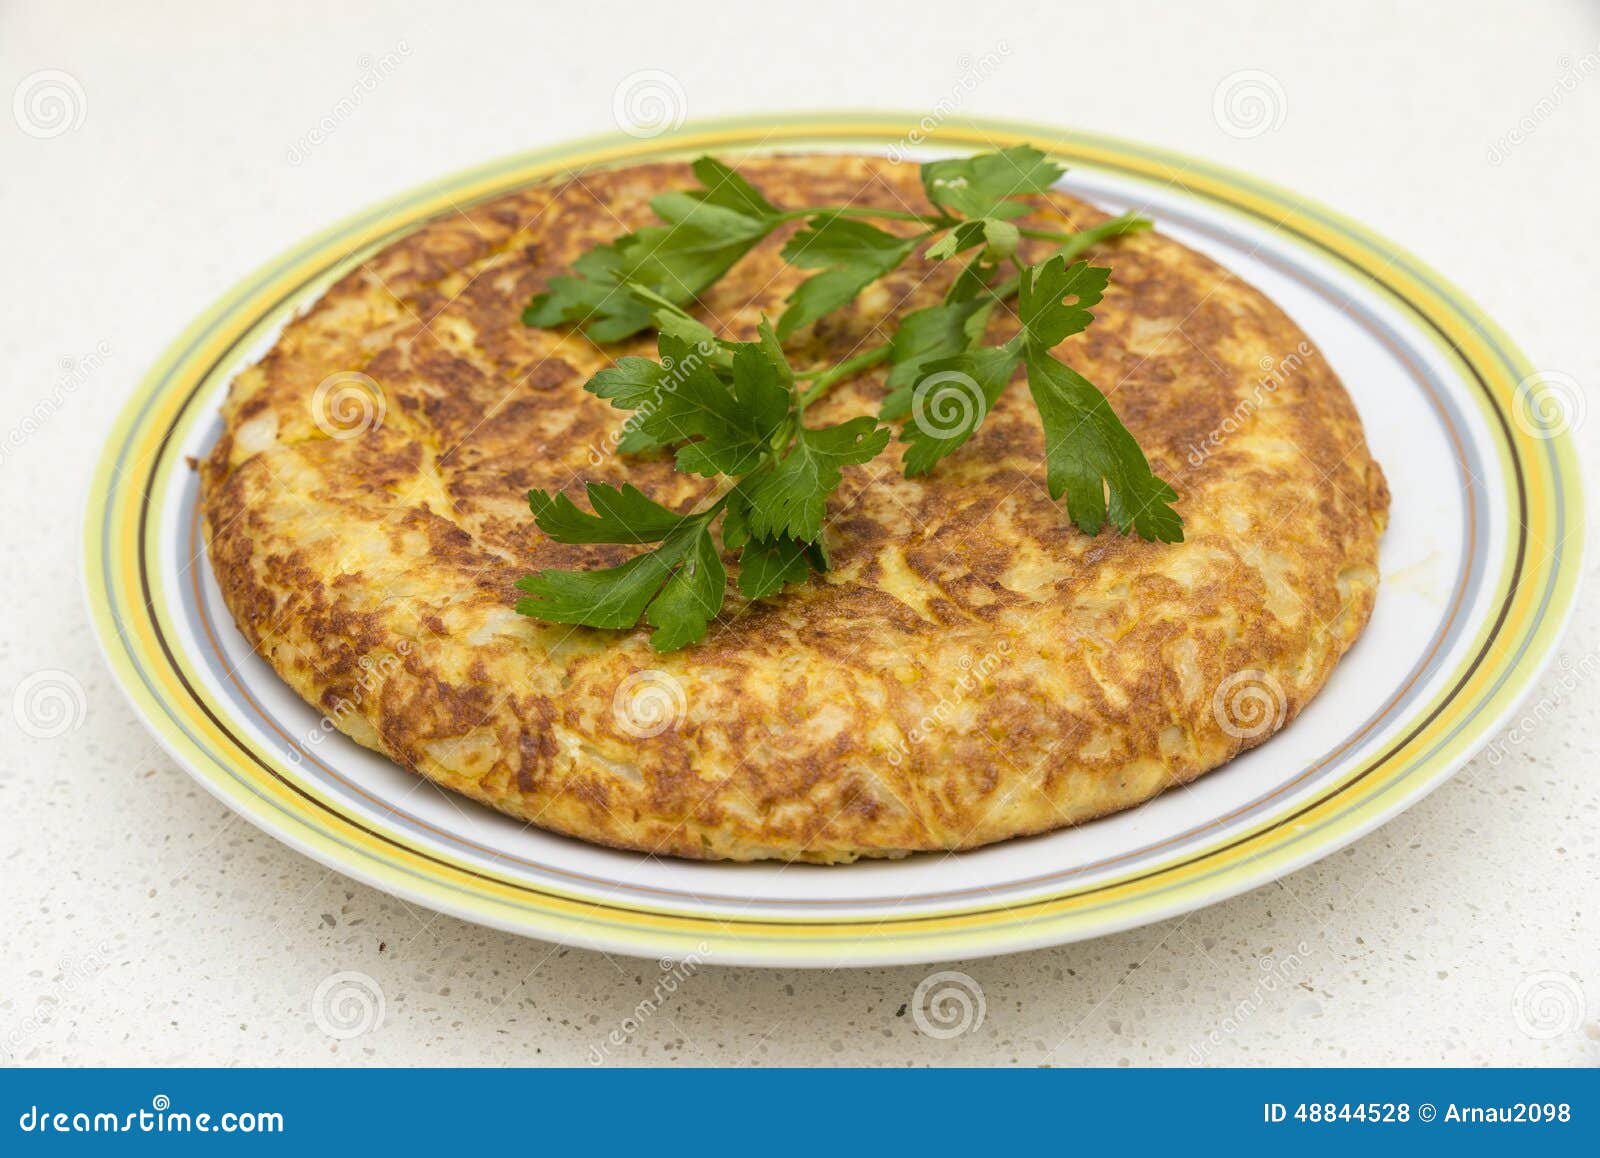 spanish omelette with parsley